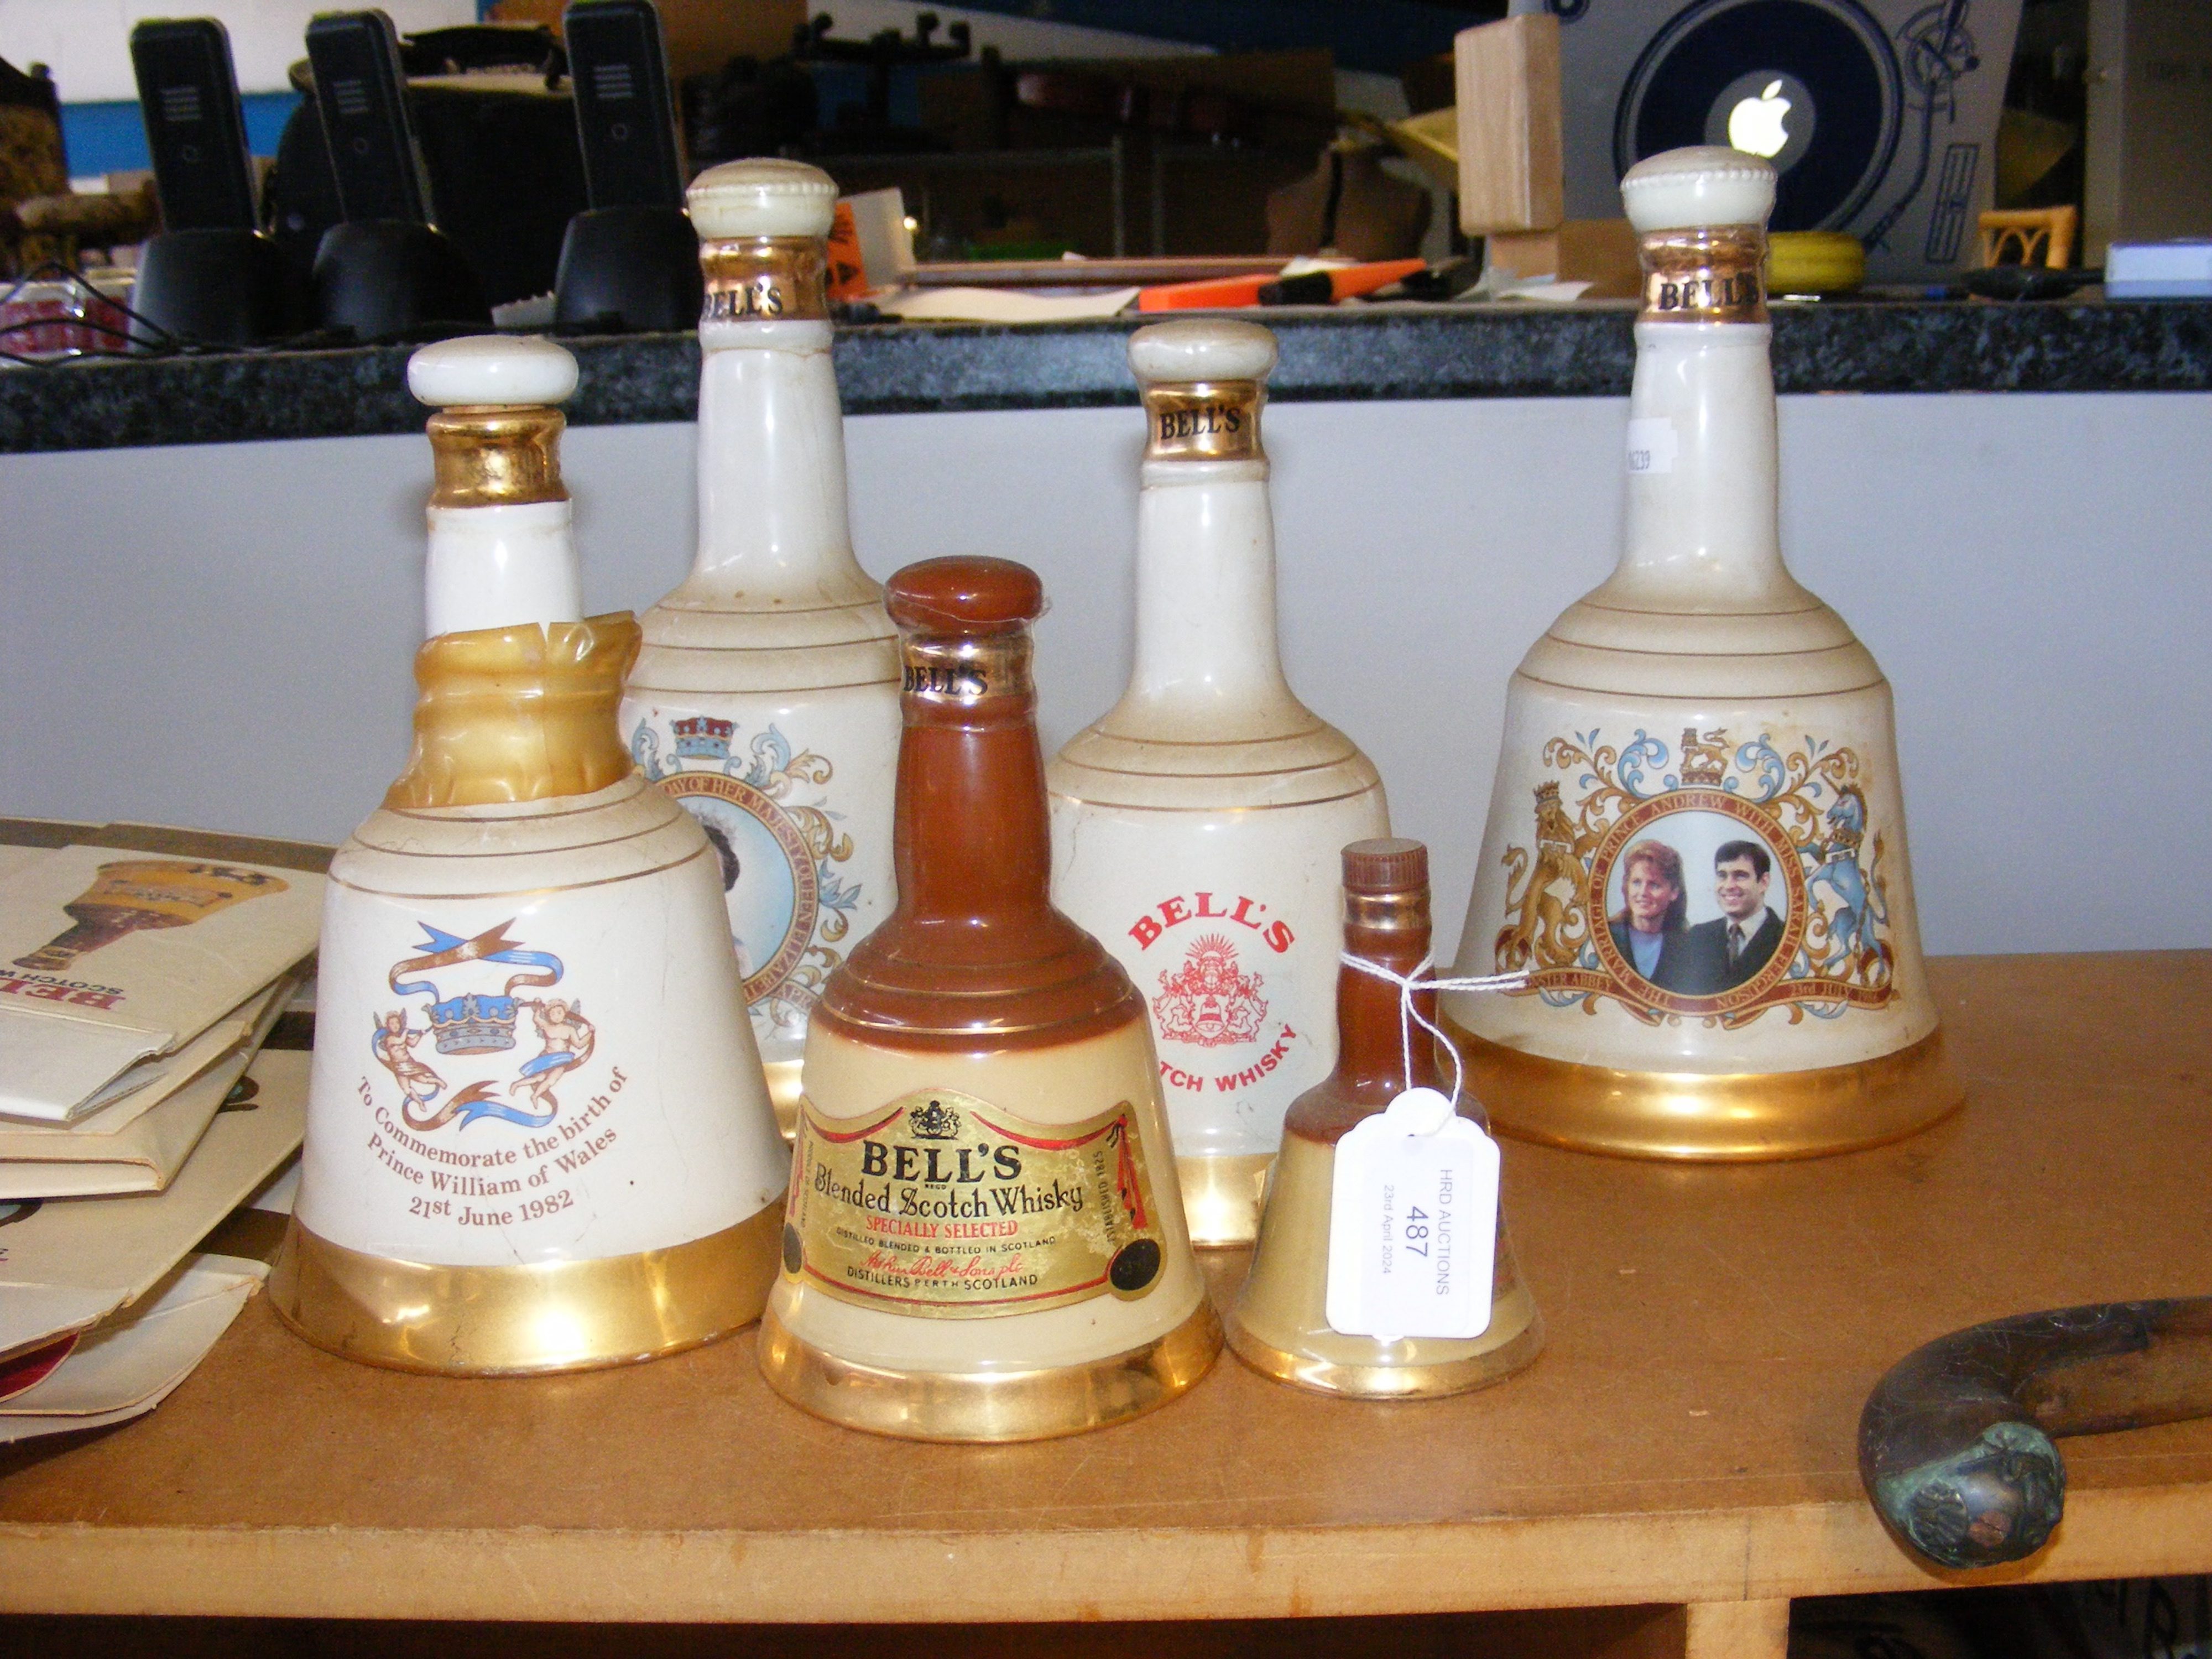 A collection of Bell's Scotch Whisky commemorative